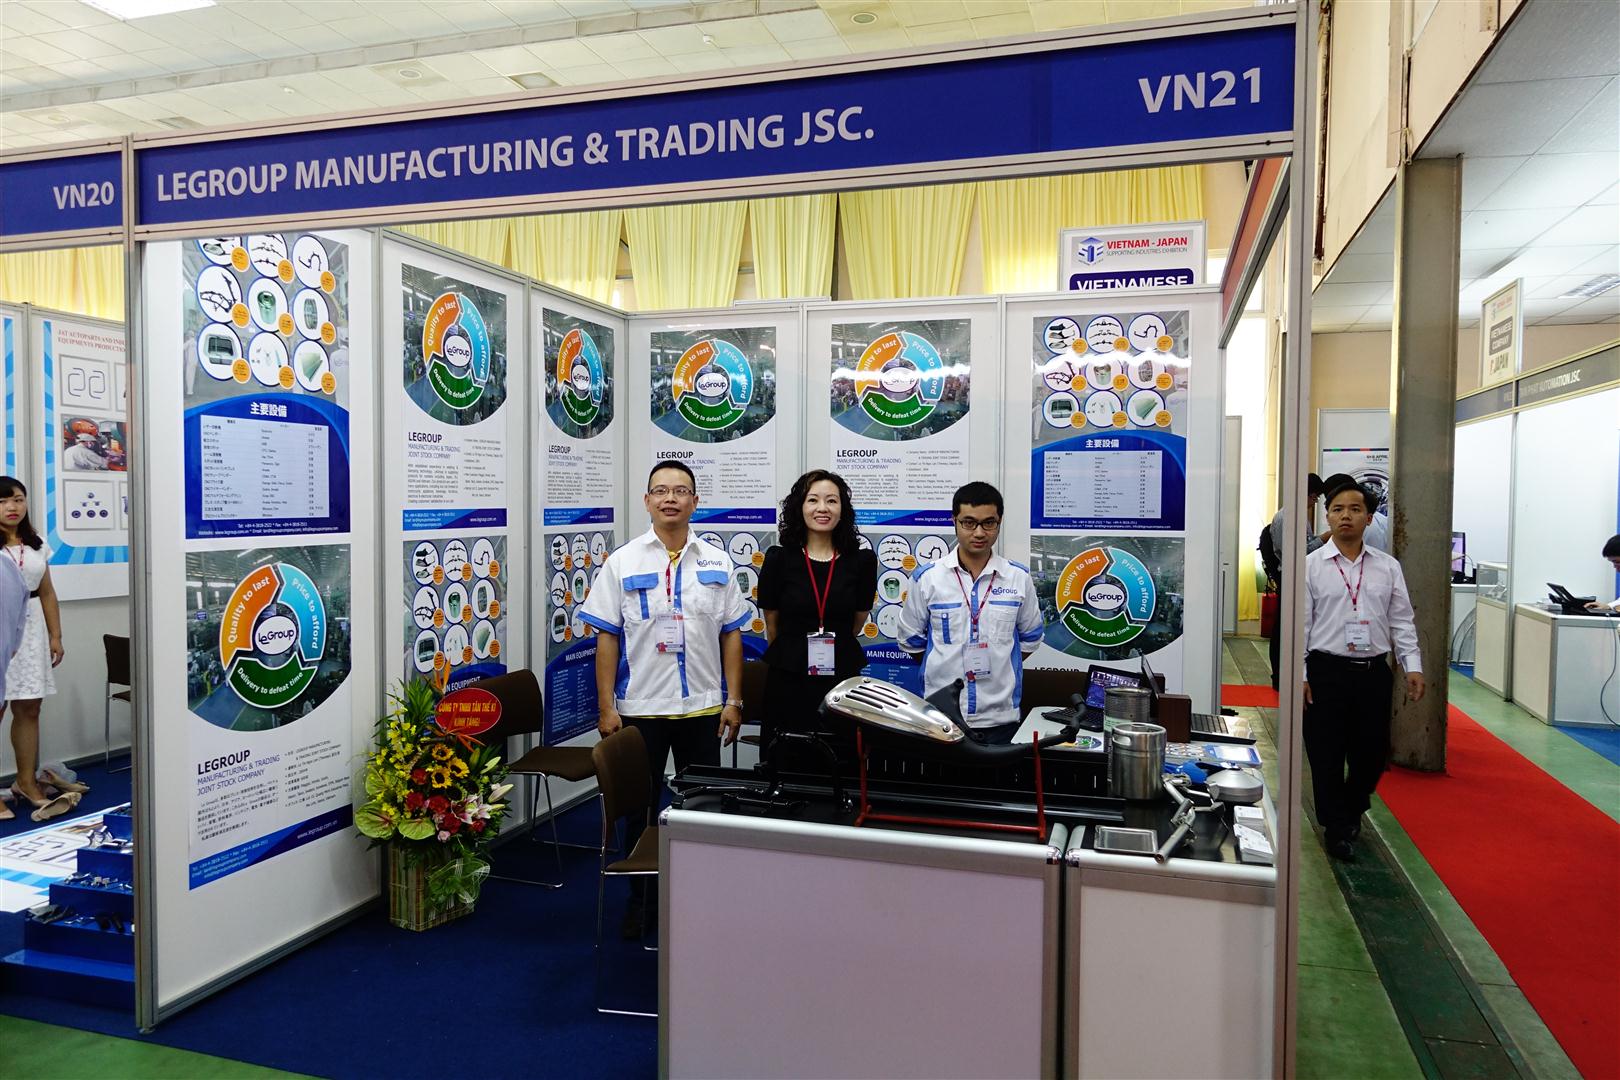 LeGroup is attending The Vietnam - Japan Supporting Industries Exhibition in Hanoi.